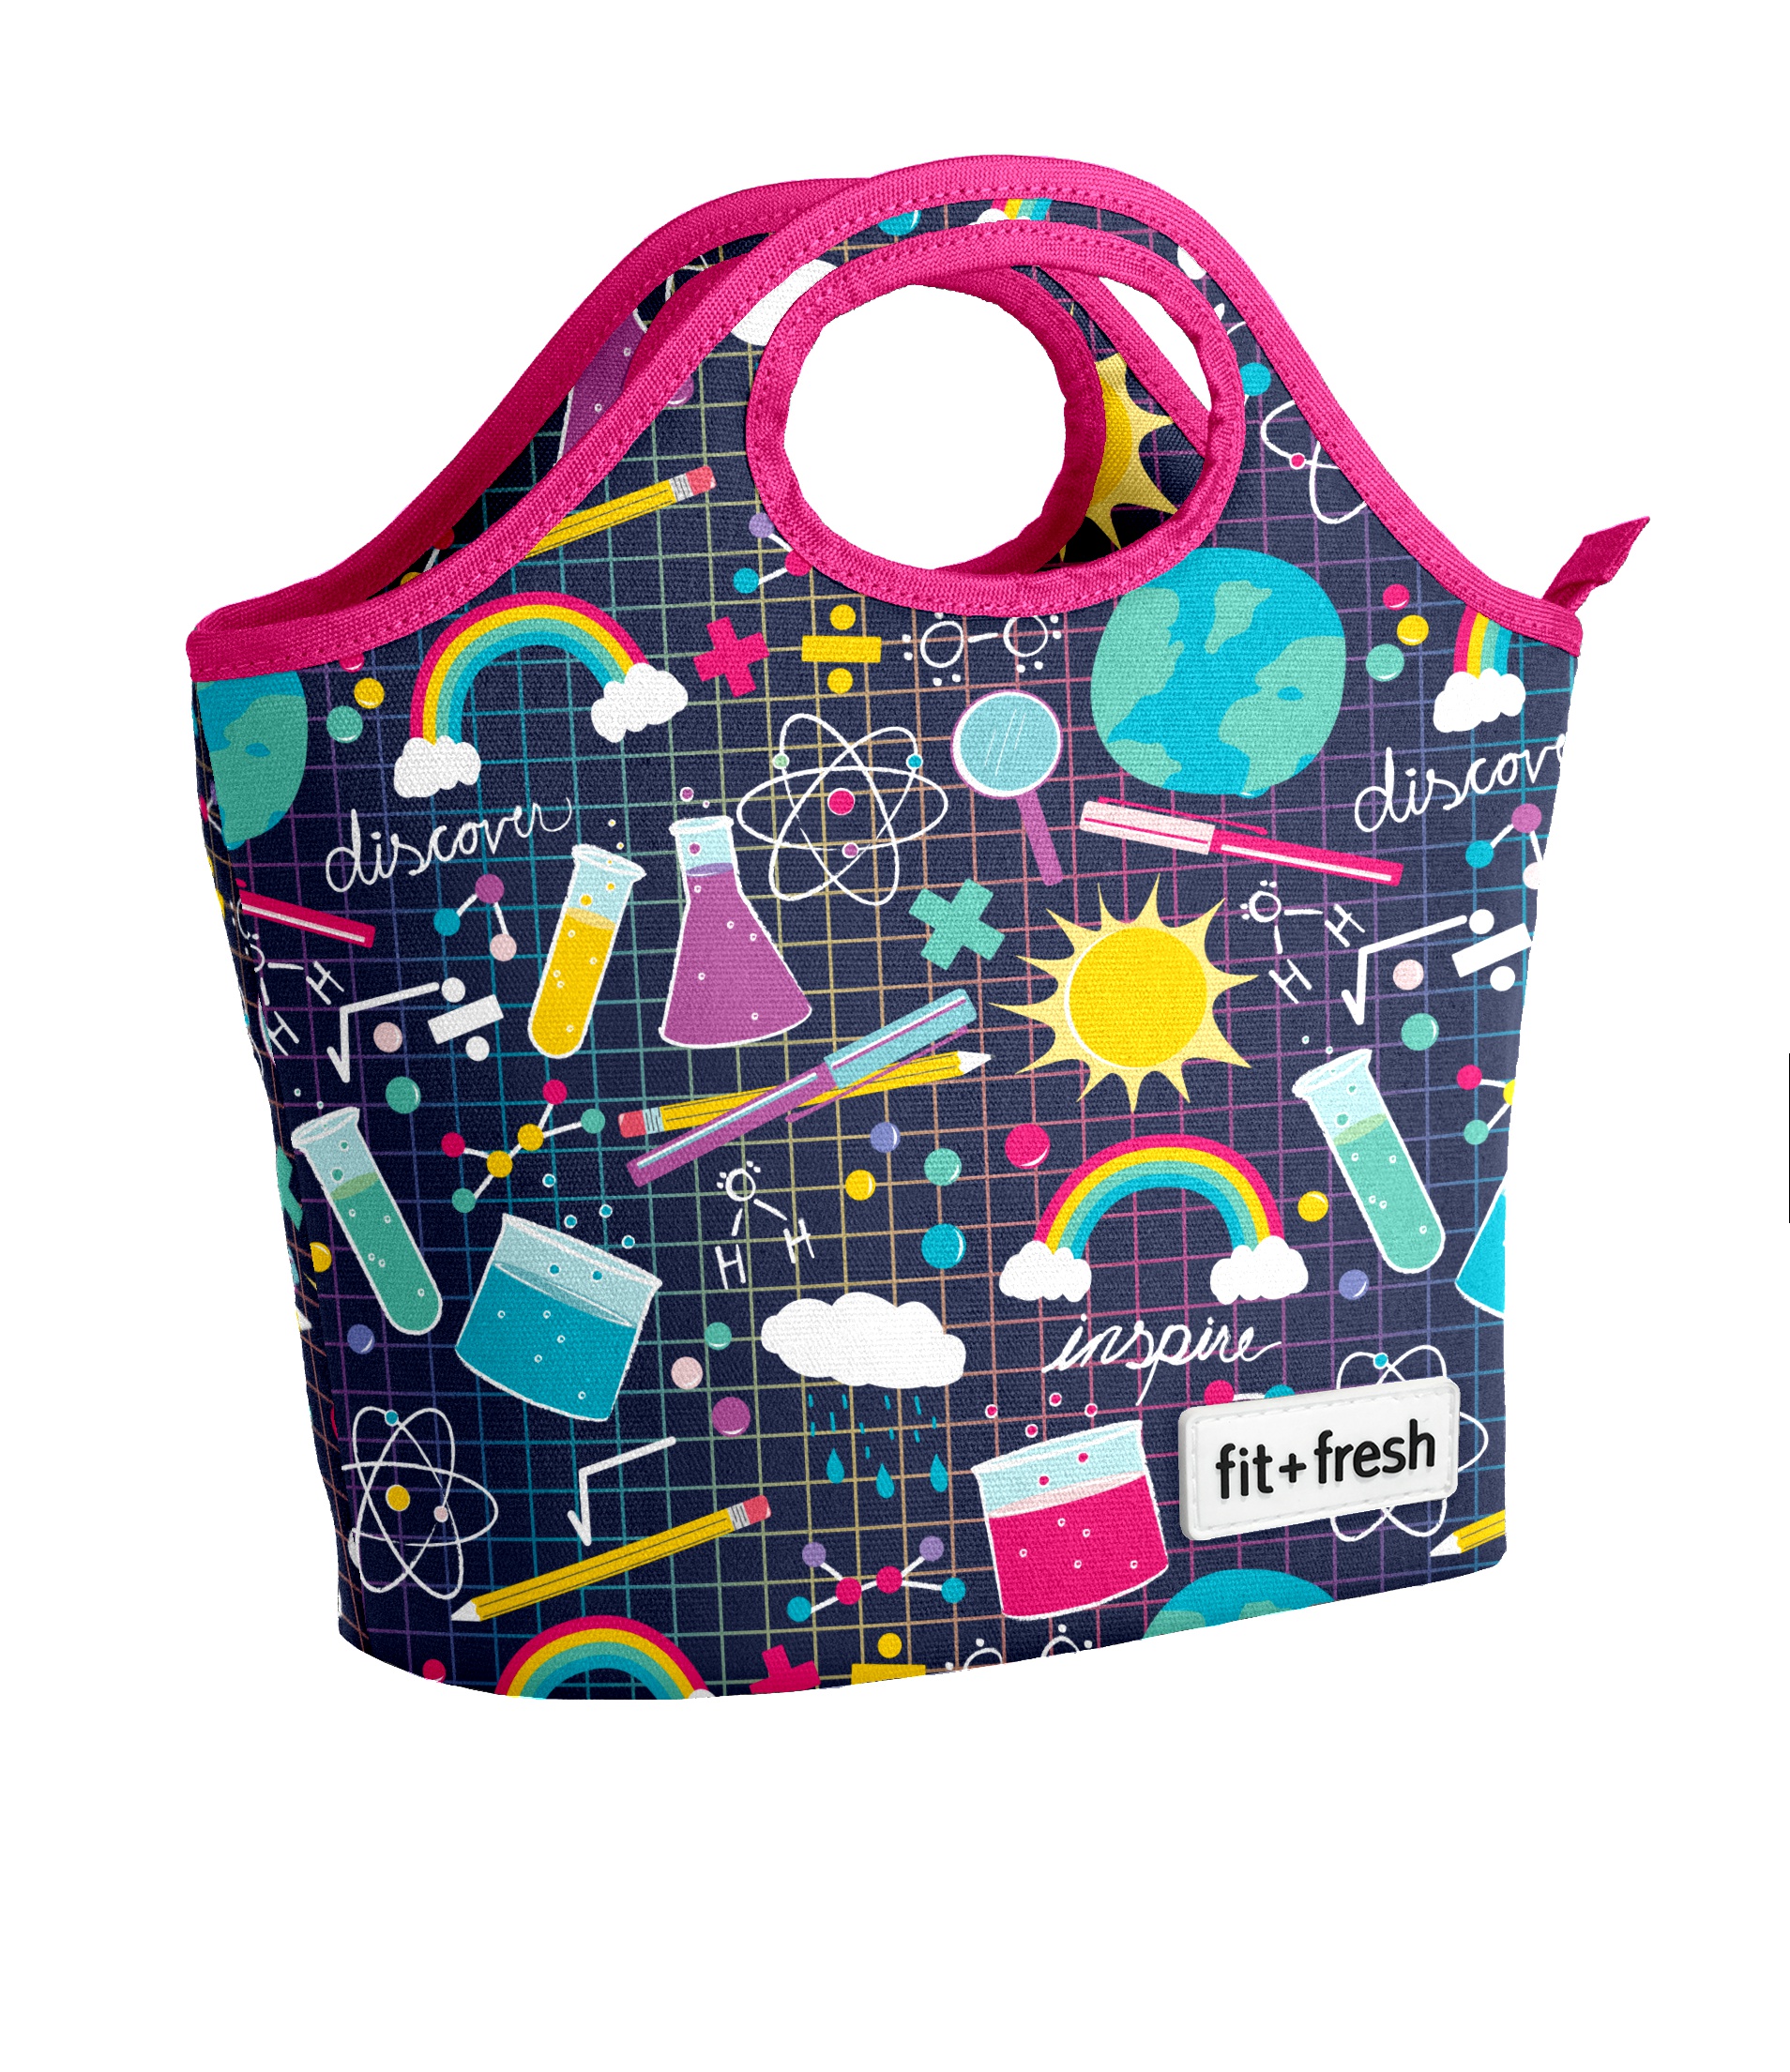 Fit&fresh 2839Ls2644 Stay Curious Sloane Bag Kit. - Picture 1 of 1